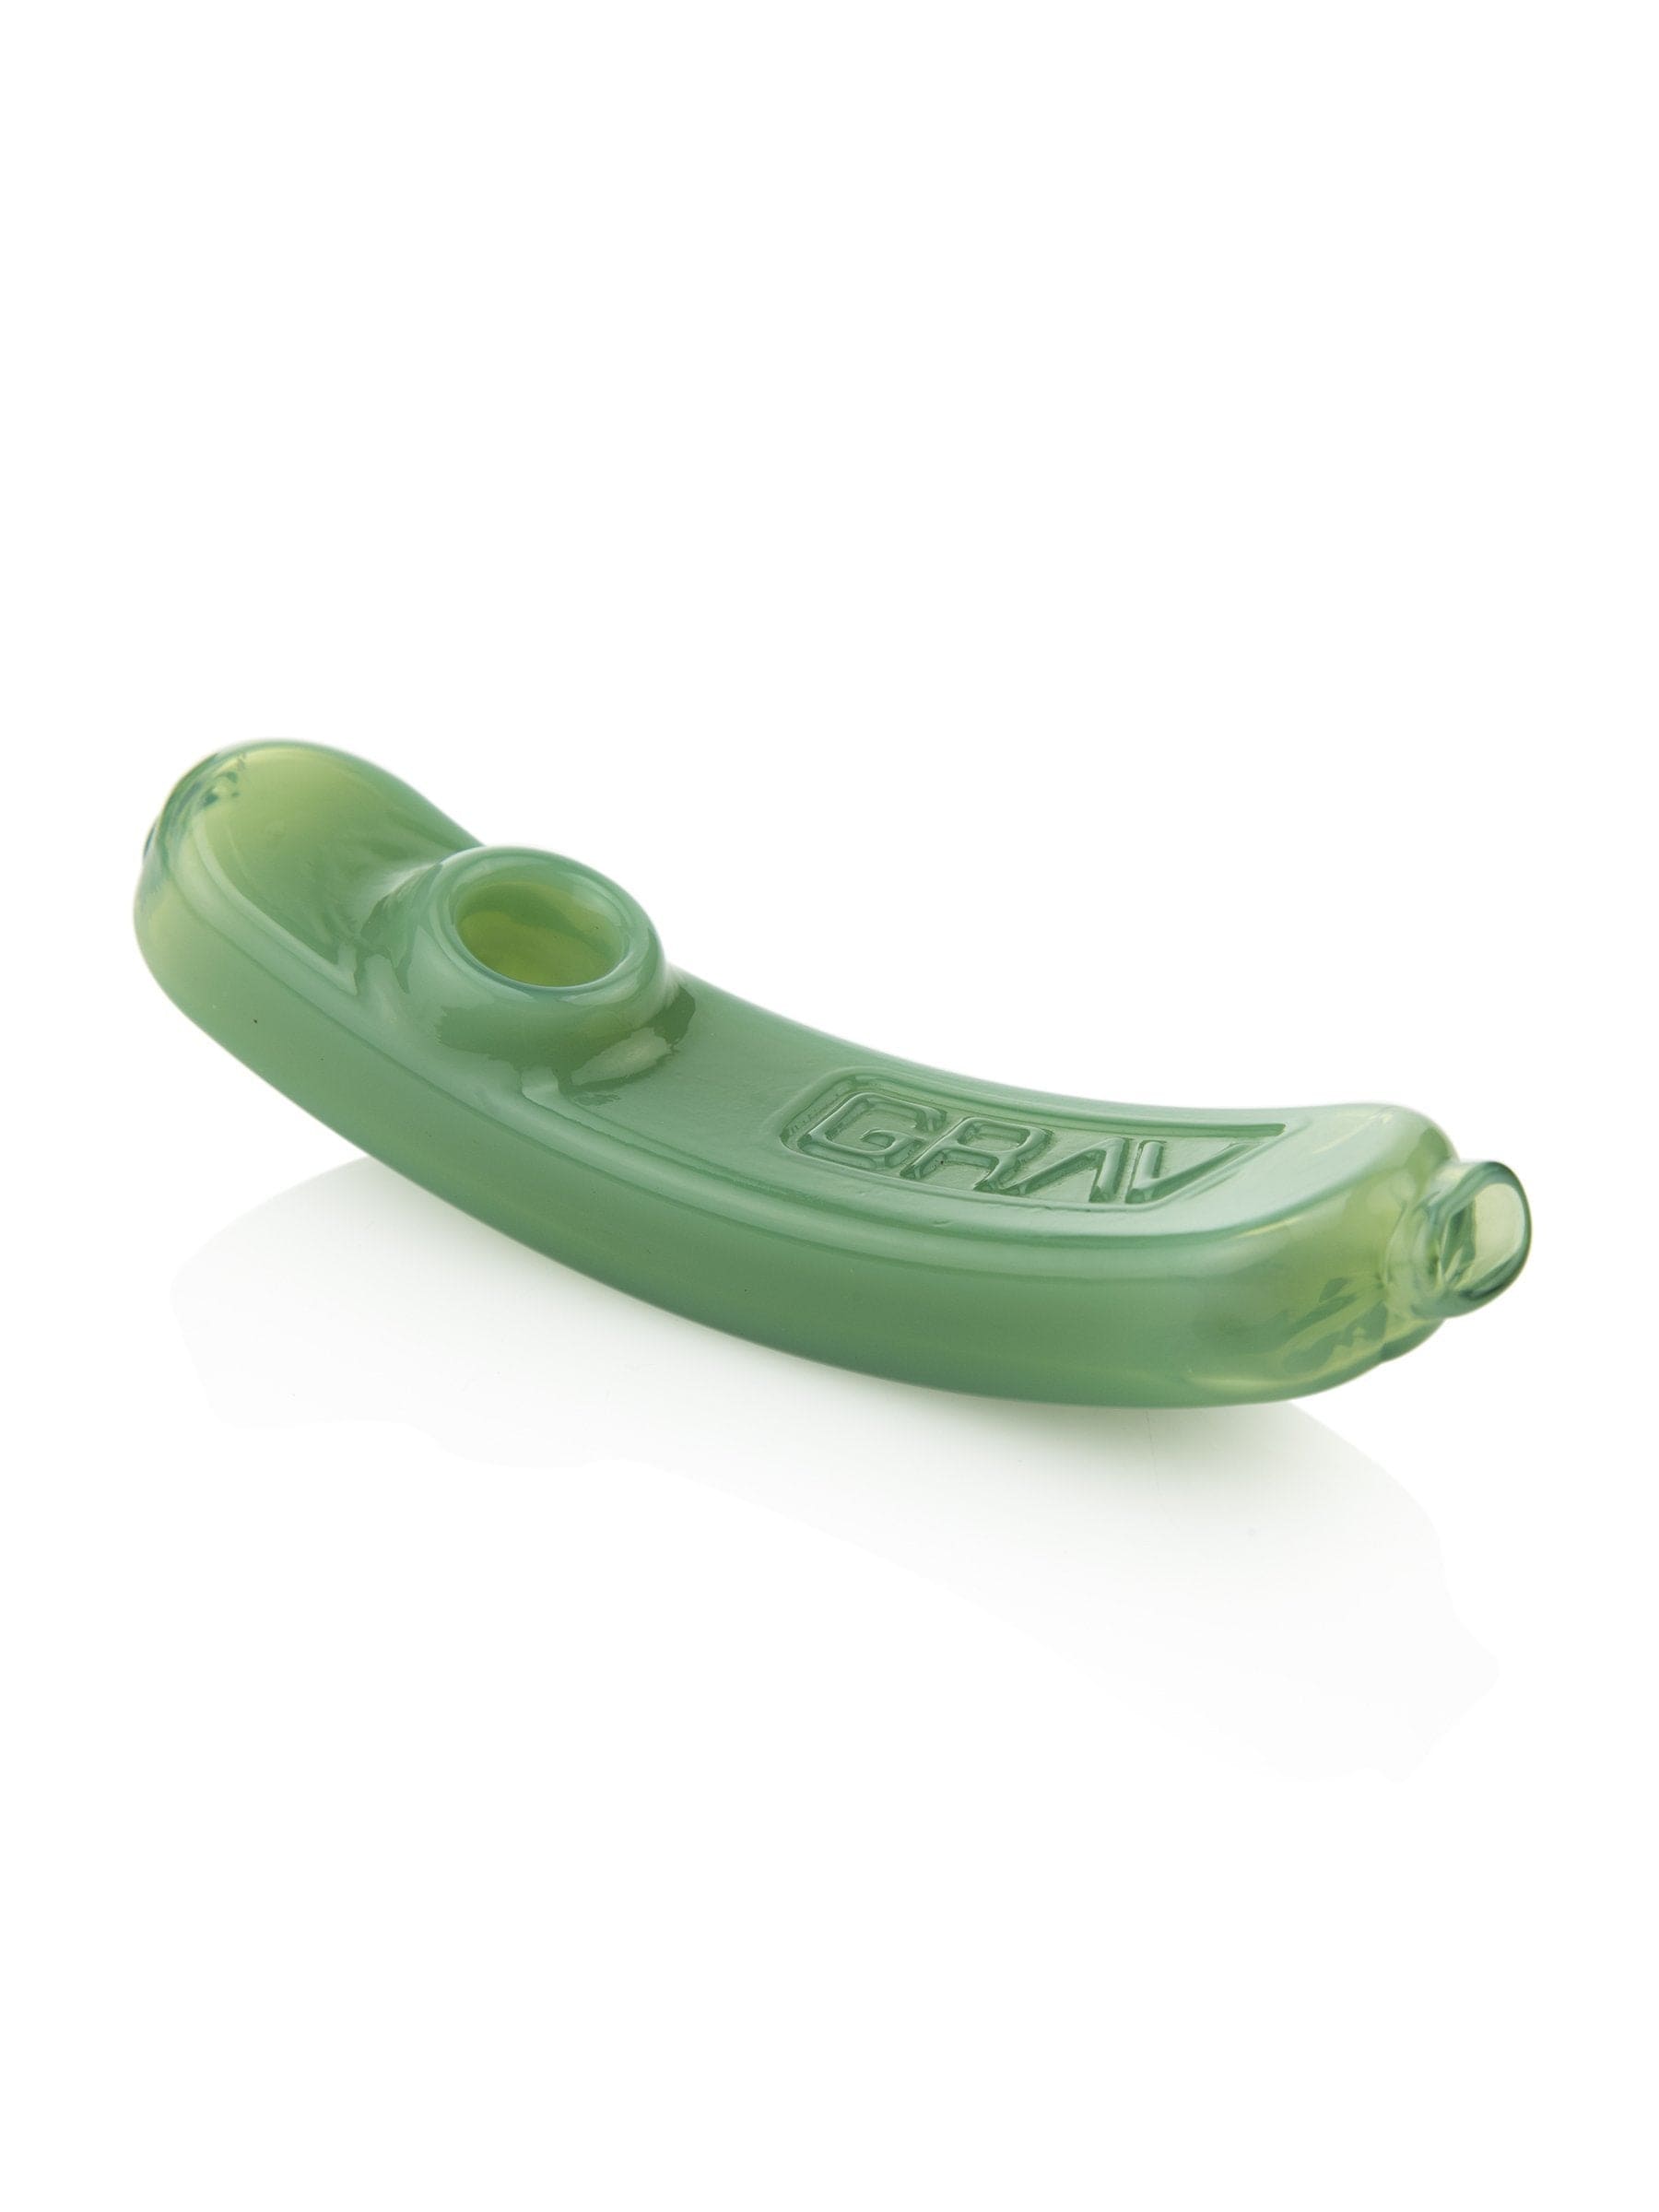 GRAV Labs Mint Hand Pipes